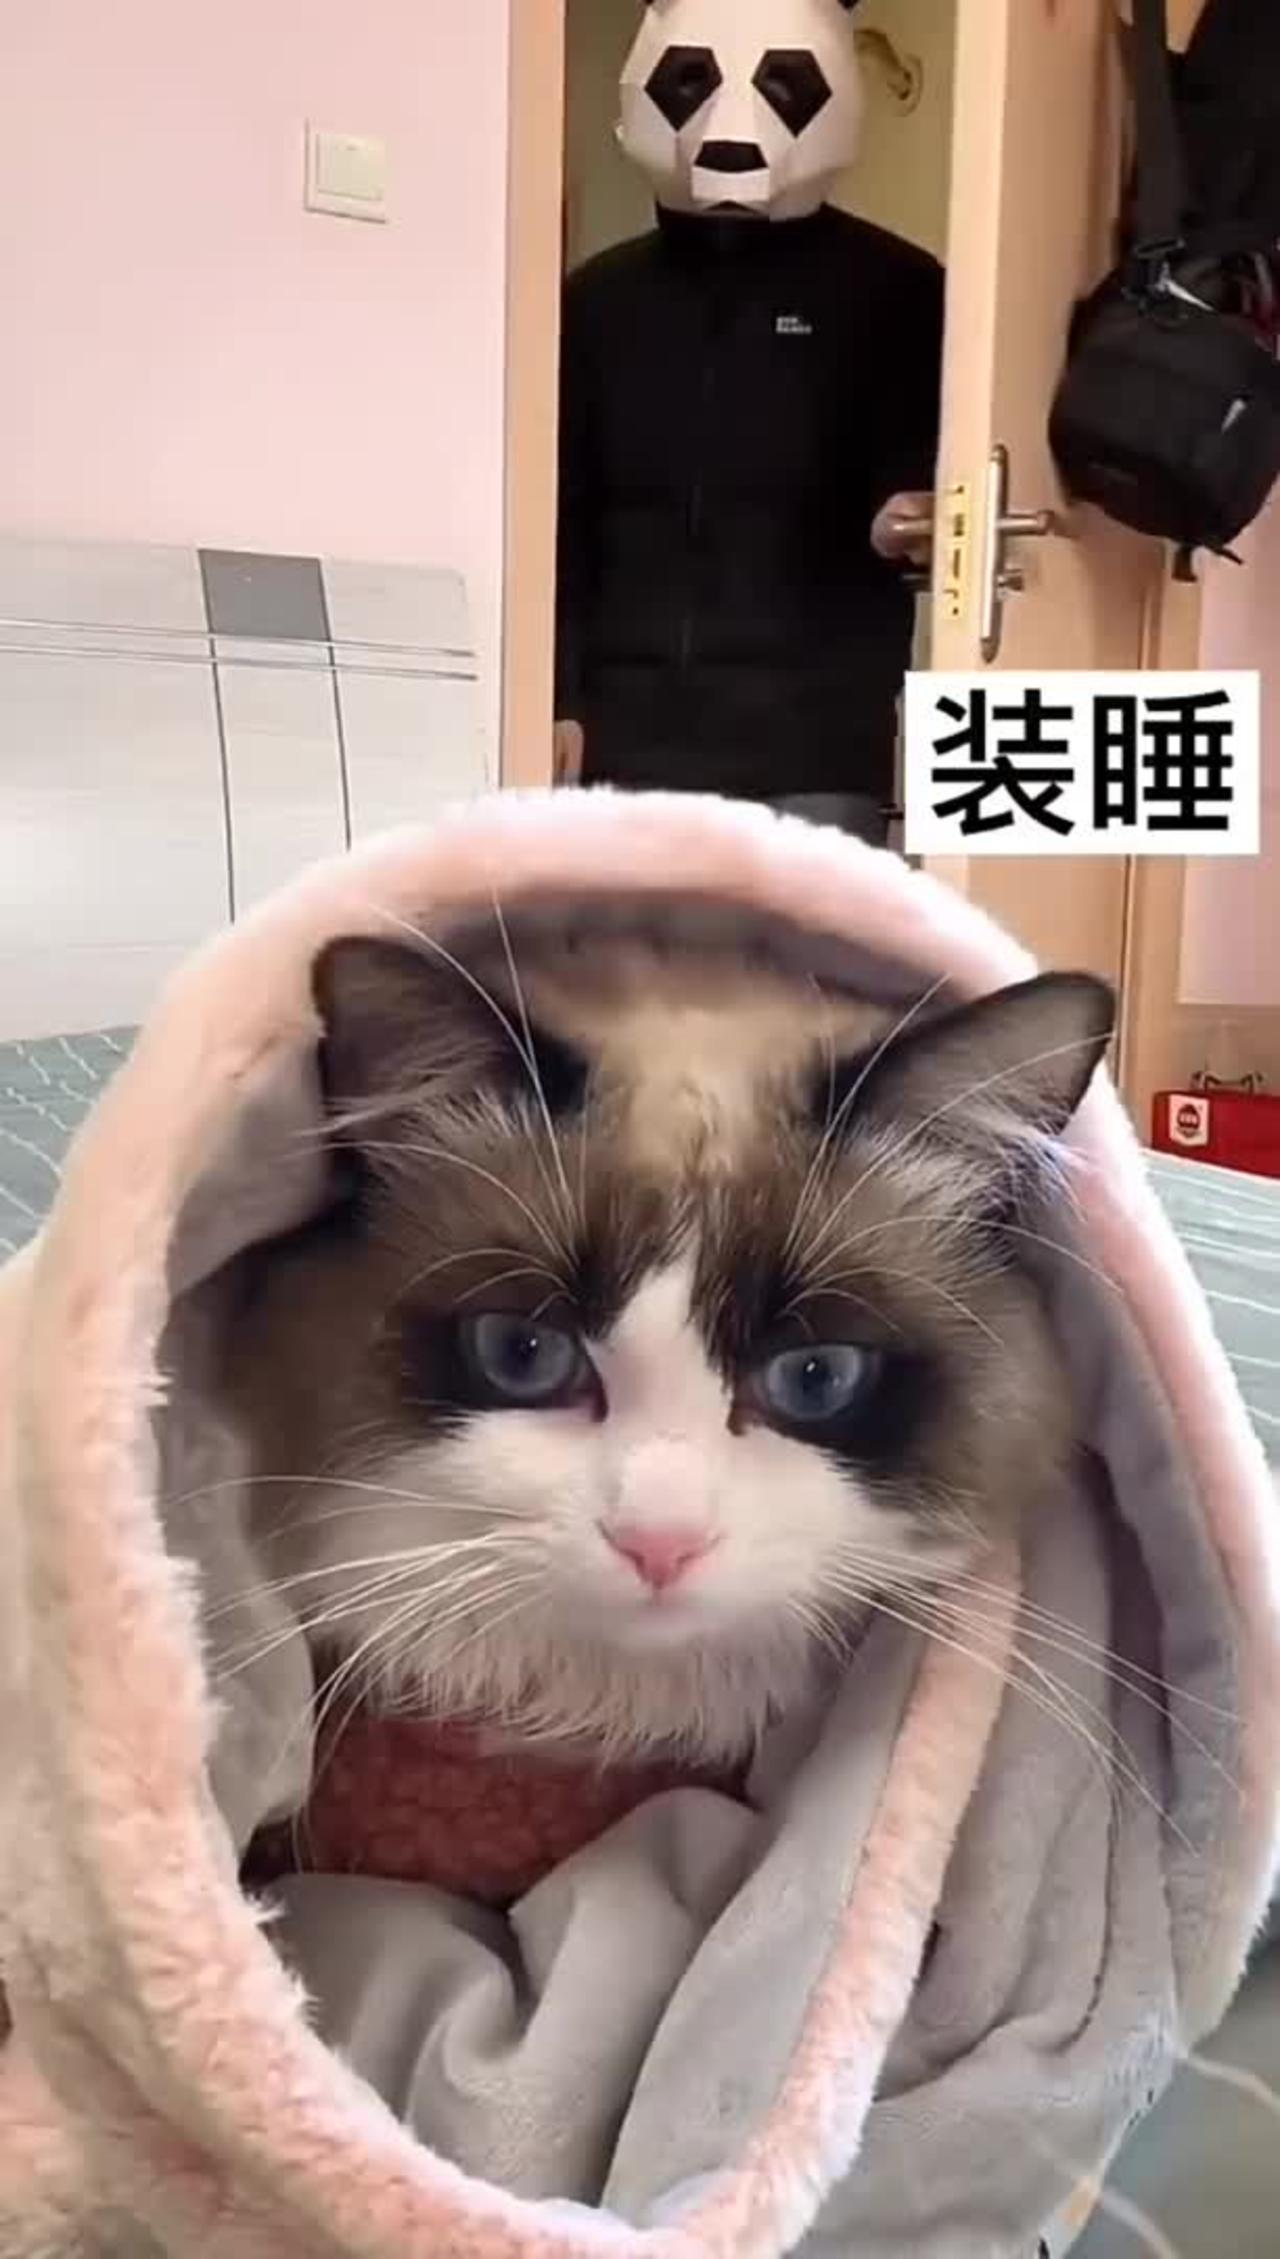 Cute and funny cat video completion